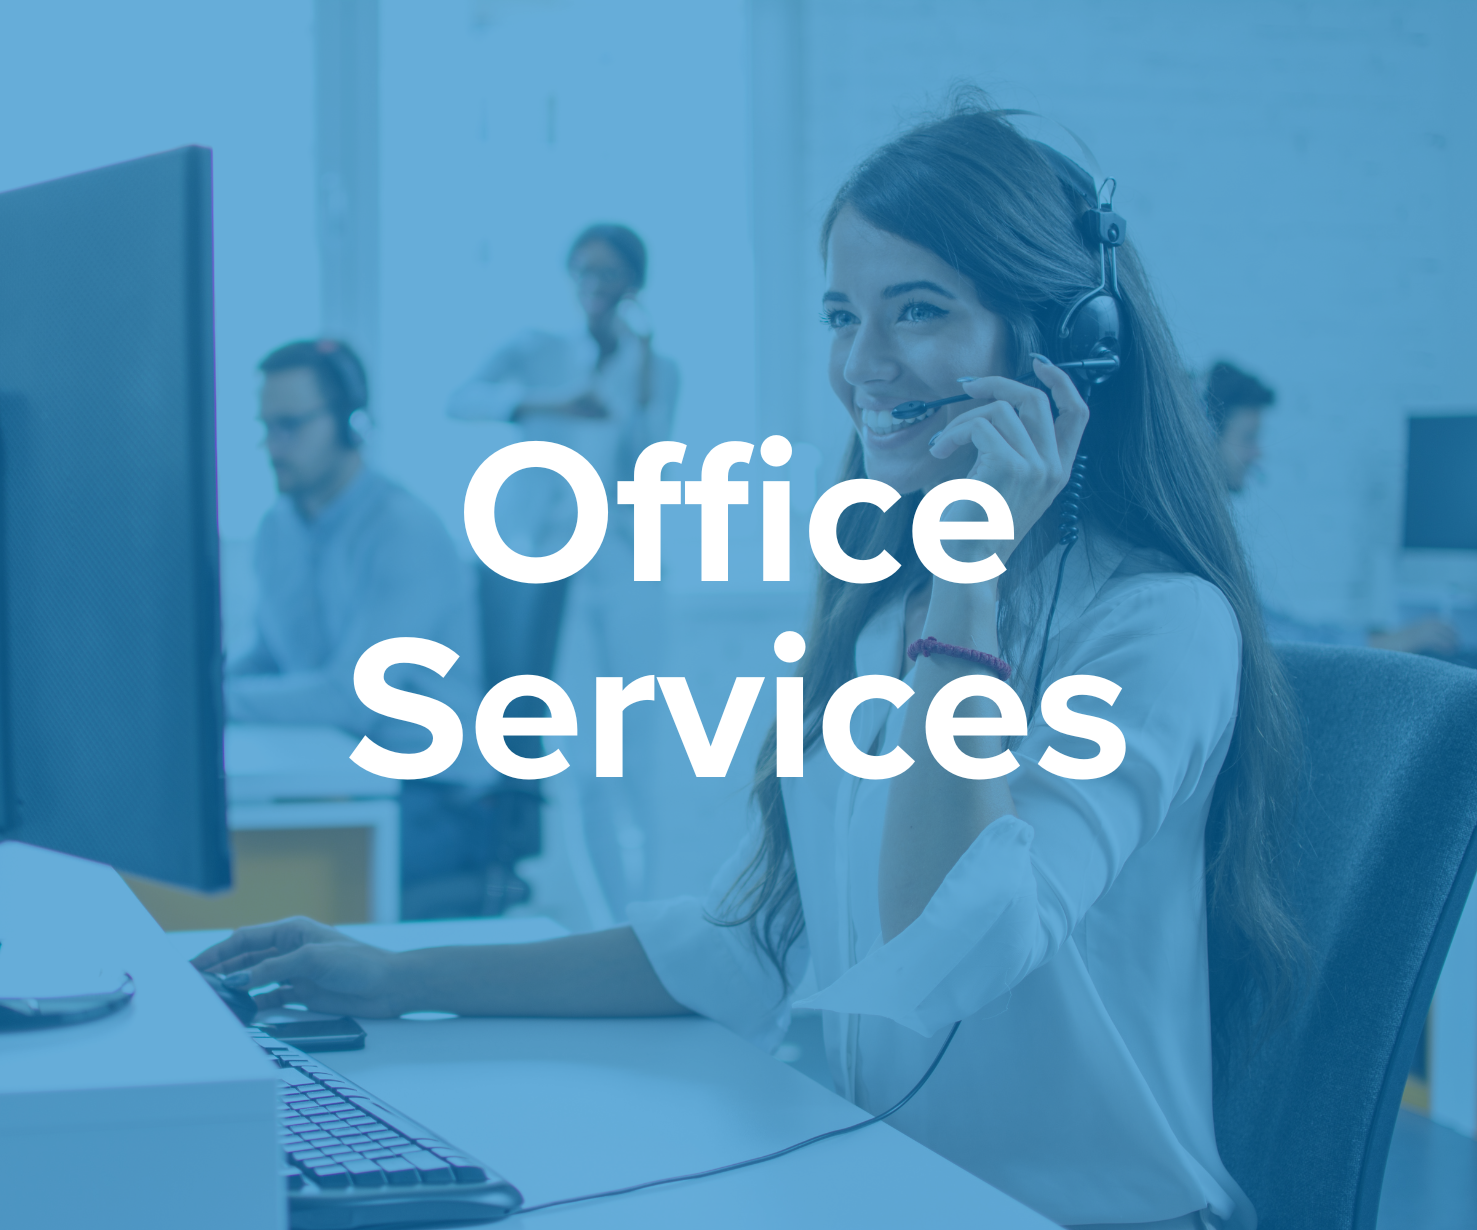 Office Services Graphic